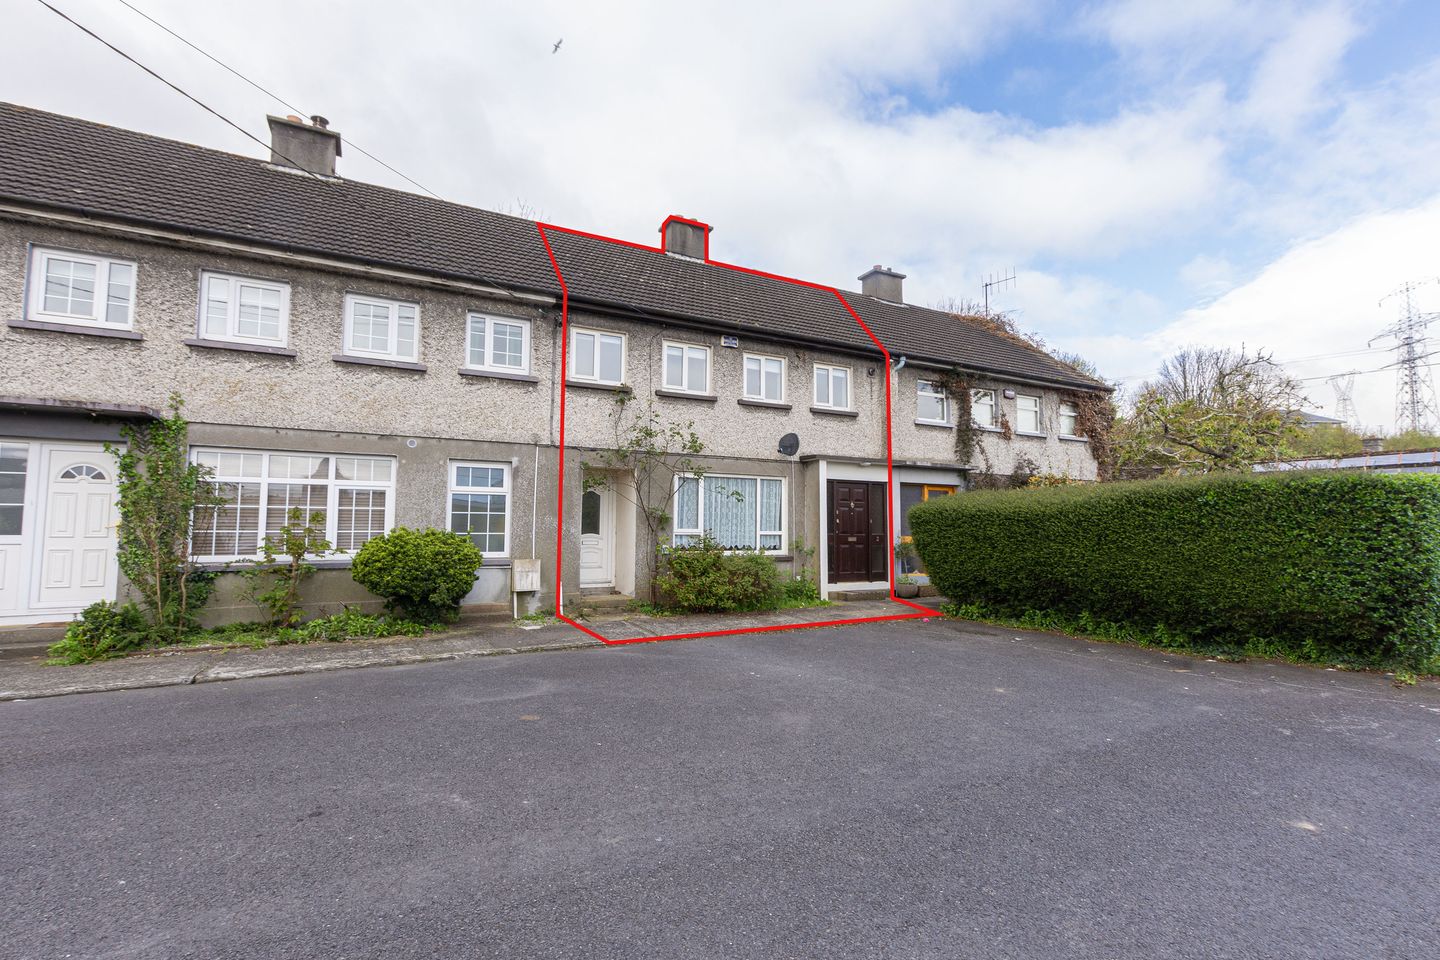 2 Springfield, Summer Hill, Waterford City, Co. Waterford, X91DFP8